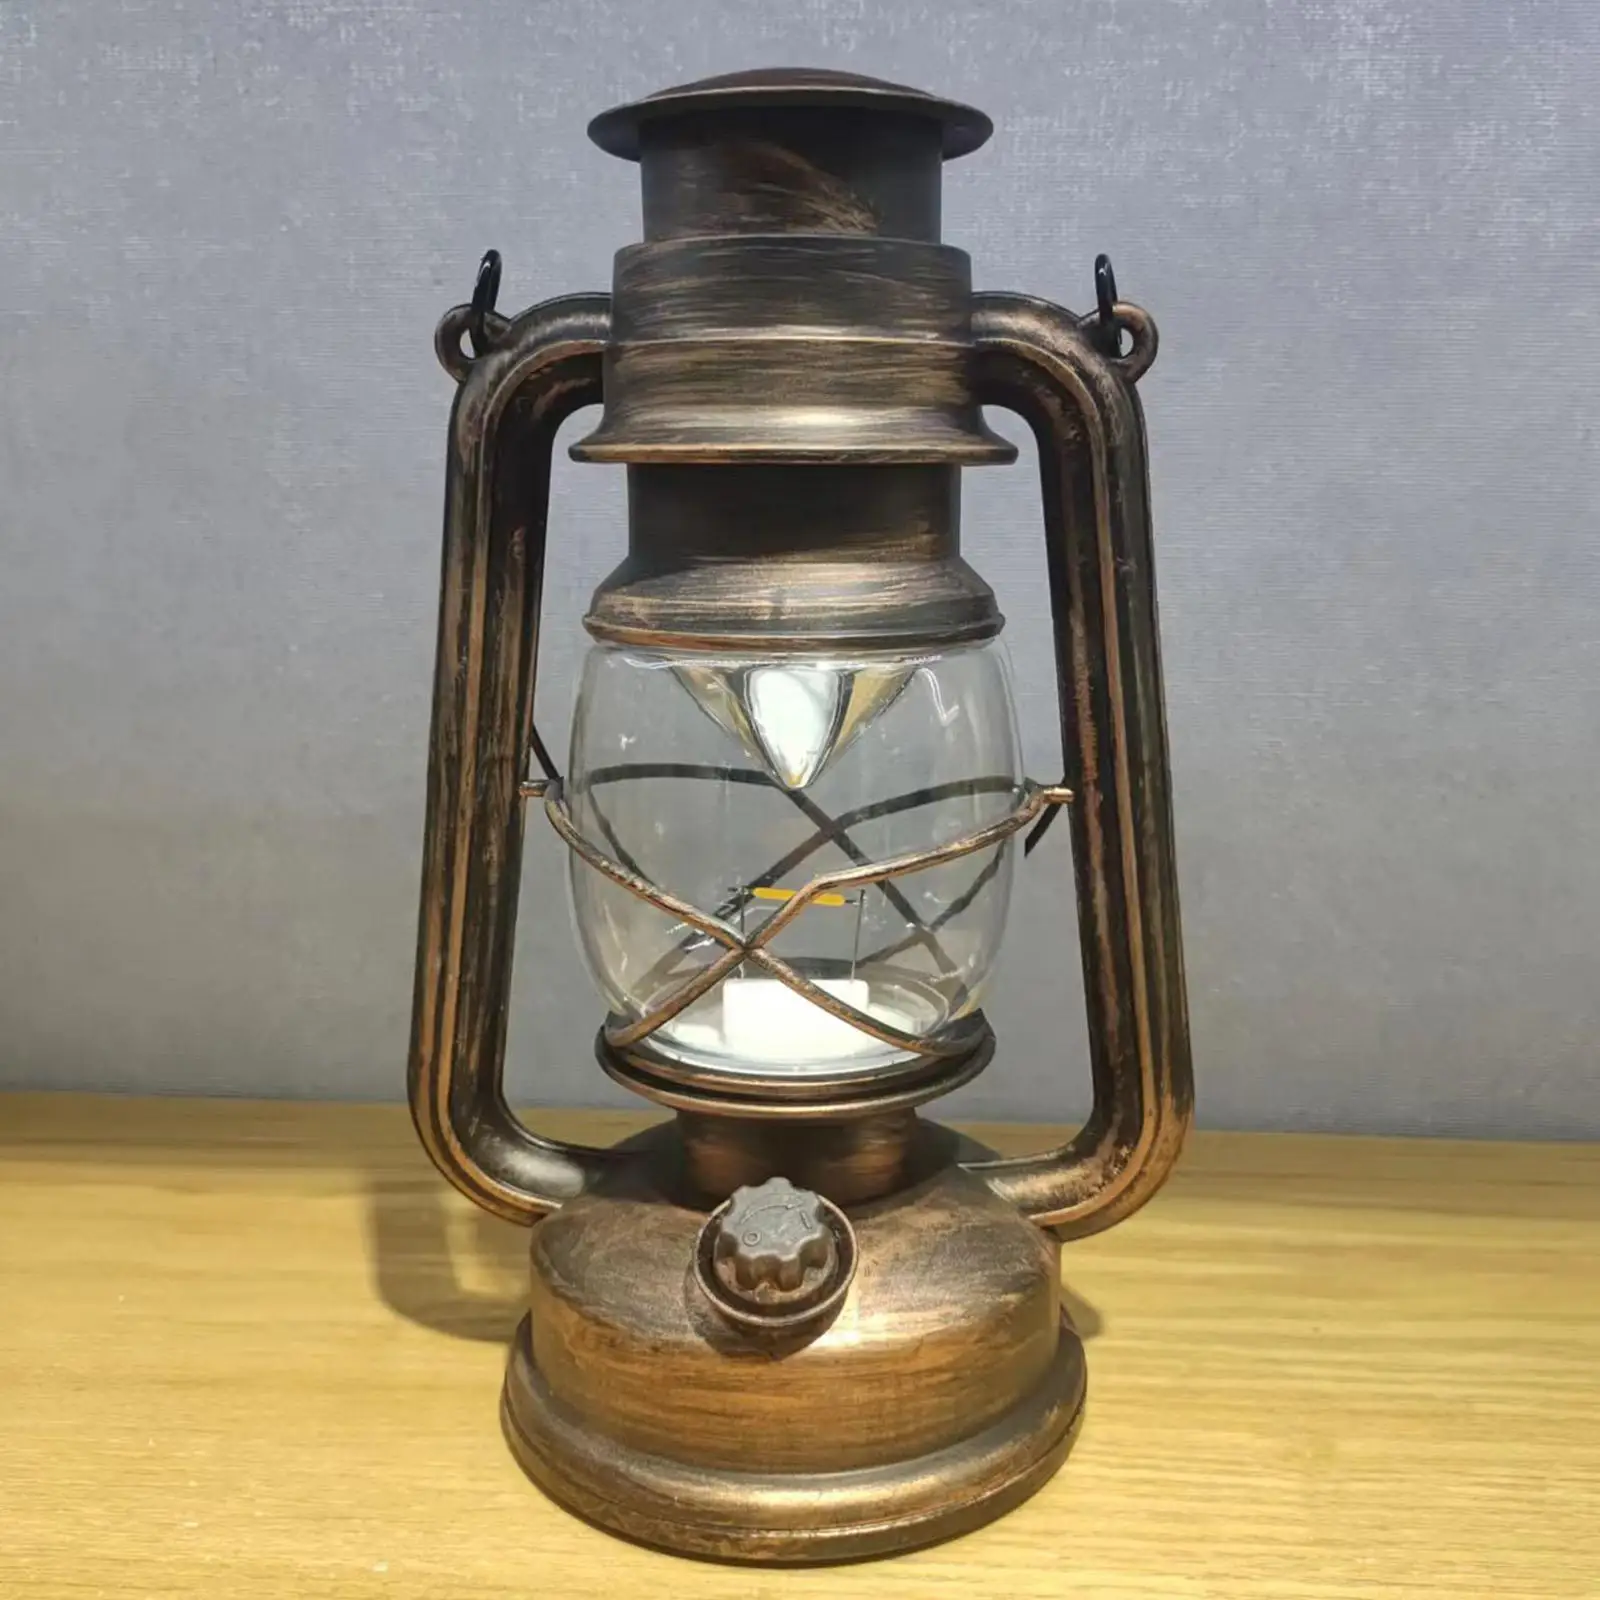 Antique Oil Lantern Lamp Outdoor Camping Light Retro Style Oil Lamp for Picnic Patio Emergency Farmhouse Decoration